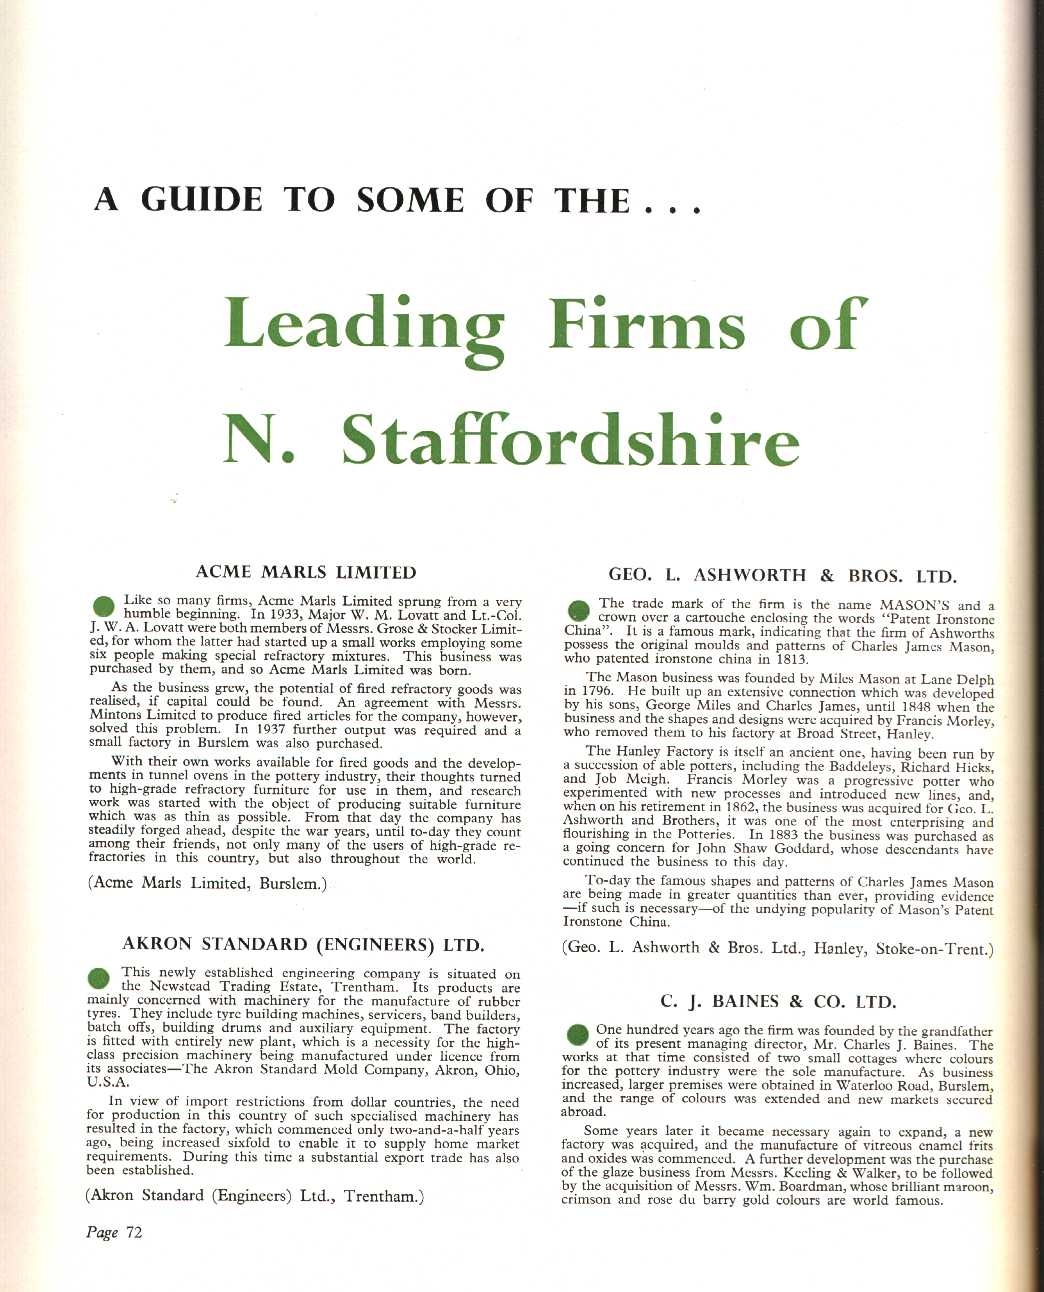 A guide to some of the leading firms of North Staffordshire, Acme Marls Limited, Akron Standard (Engineers) Ltd, Geo. L. Ashworth & Bros. Ltd, C. J. Bains & Co. Ltd.